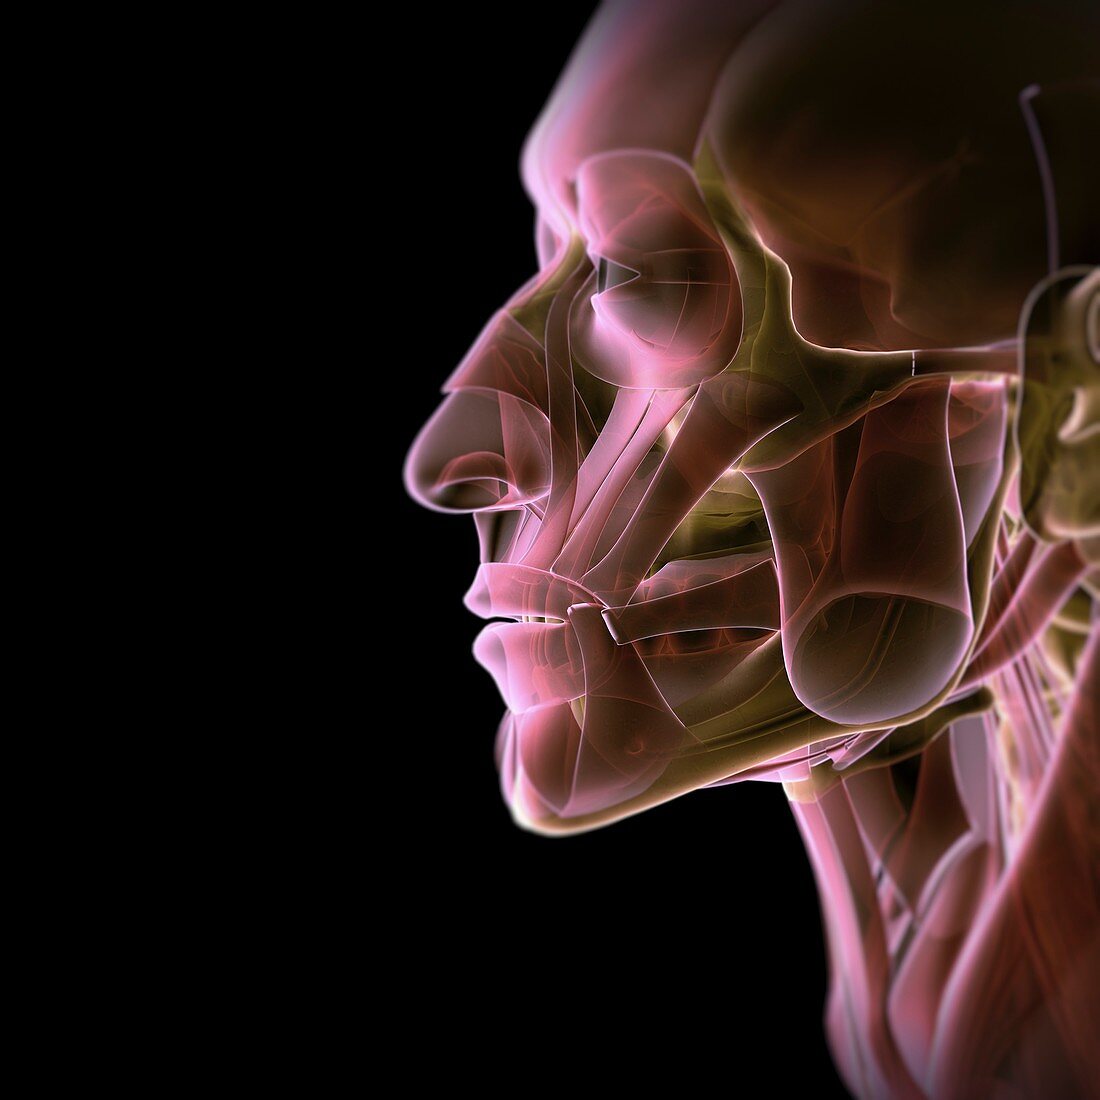 Anatomy of the Face, artwork